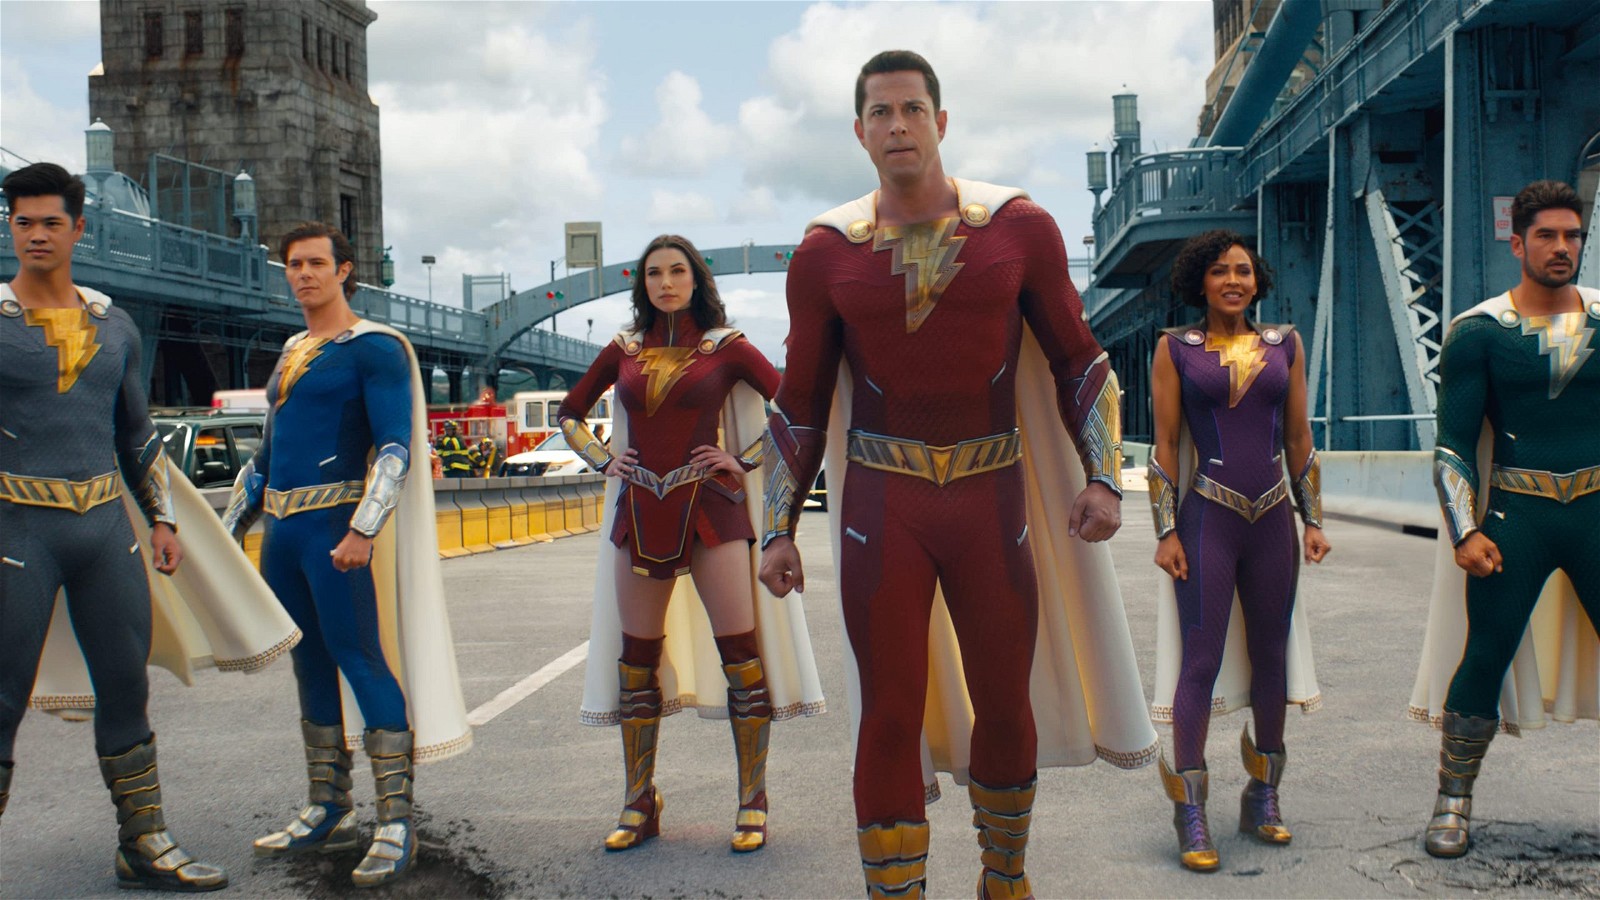 (L to R) Ross Butler as Eugene Choi, Adam Brody as Freddie Freeman, Grace Fulton as Mary Bromfield, Zachary Levi as Billy Batson/Shazam, Meagan Good as Darla Dudley, and D.J. Cotrona as Pedro Peña in Shazam! Fury of the Gods